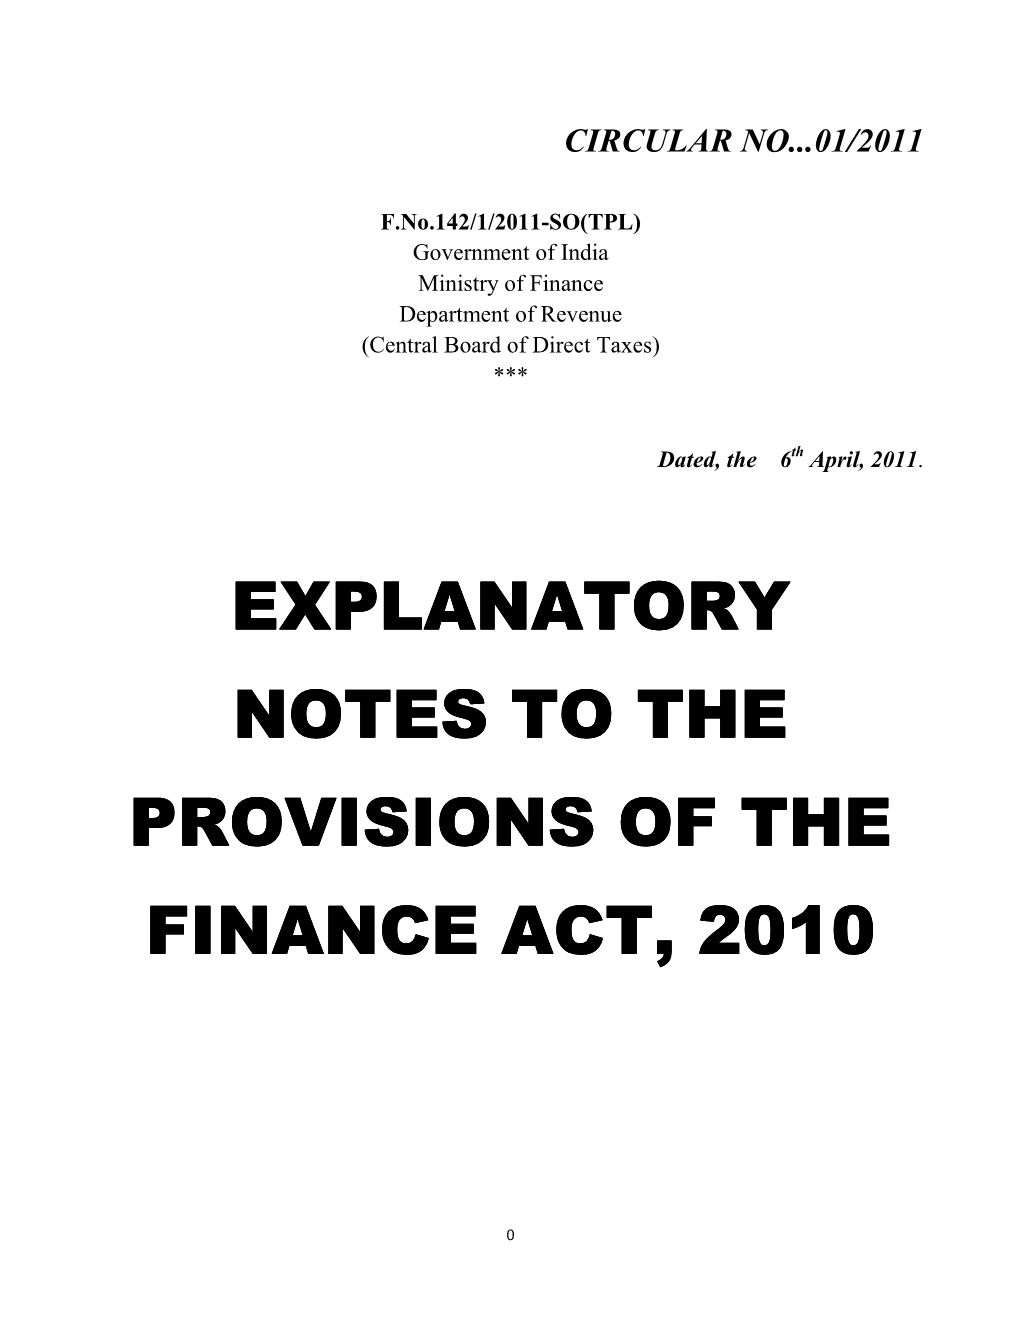 Explanatory Notes to the Provisions of the Finance Act, 2010